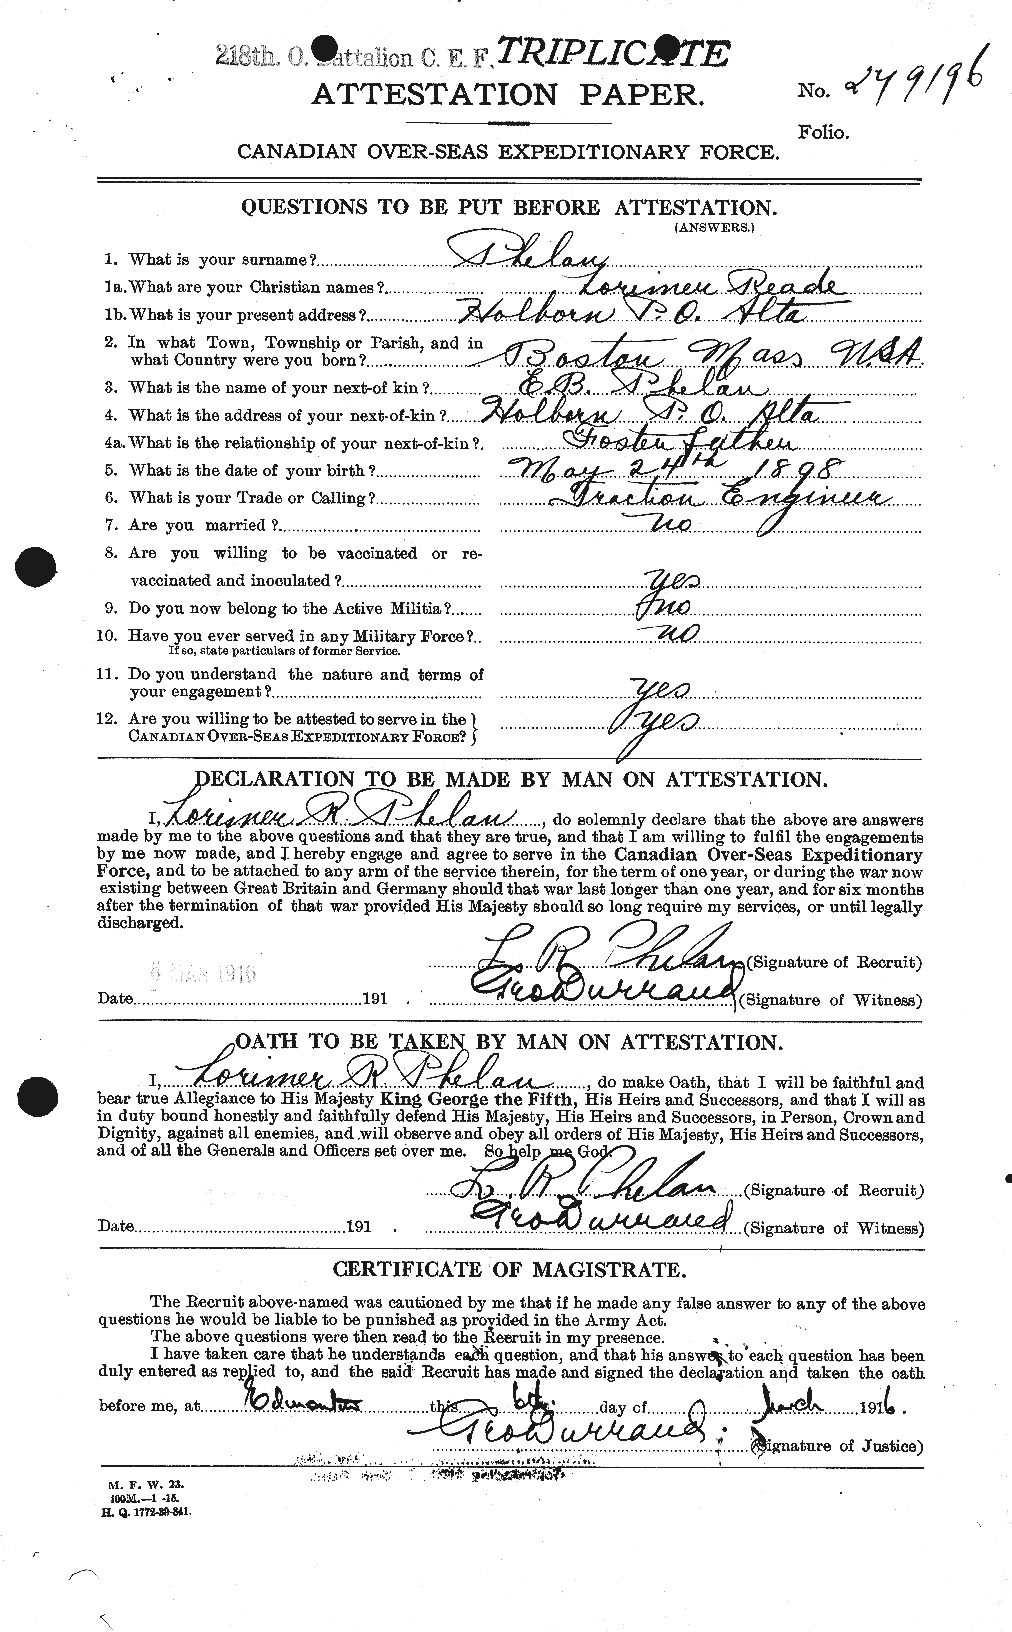 Personnel Records of the First World War - CEF 576959a